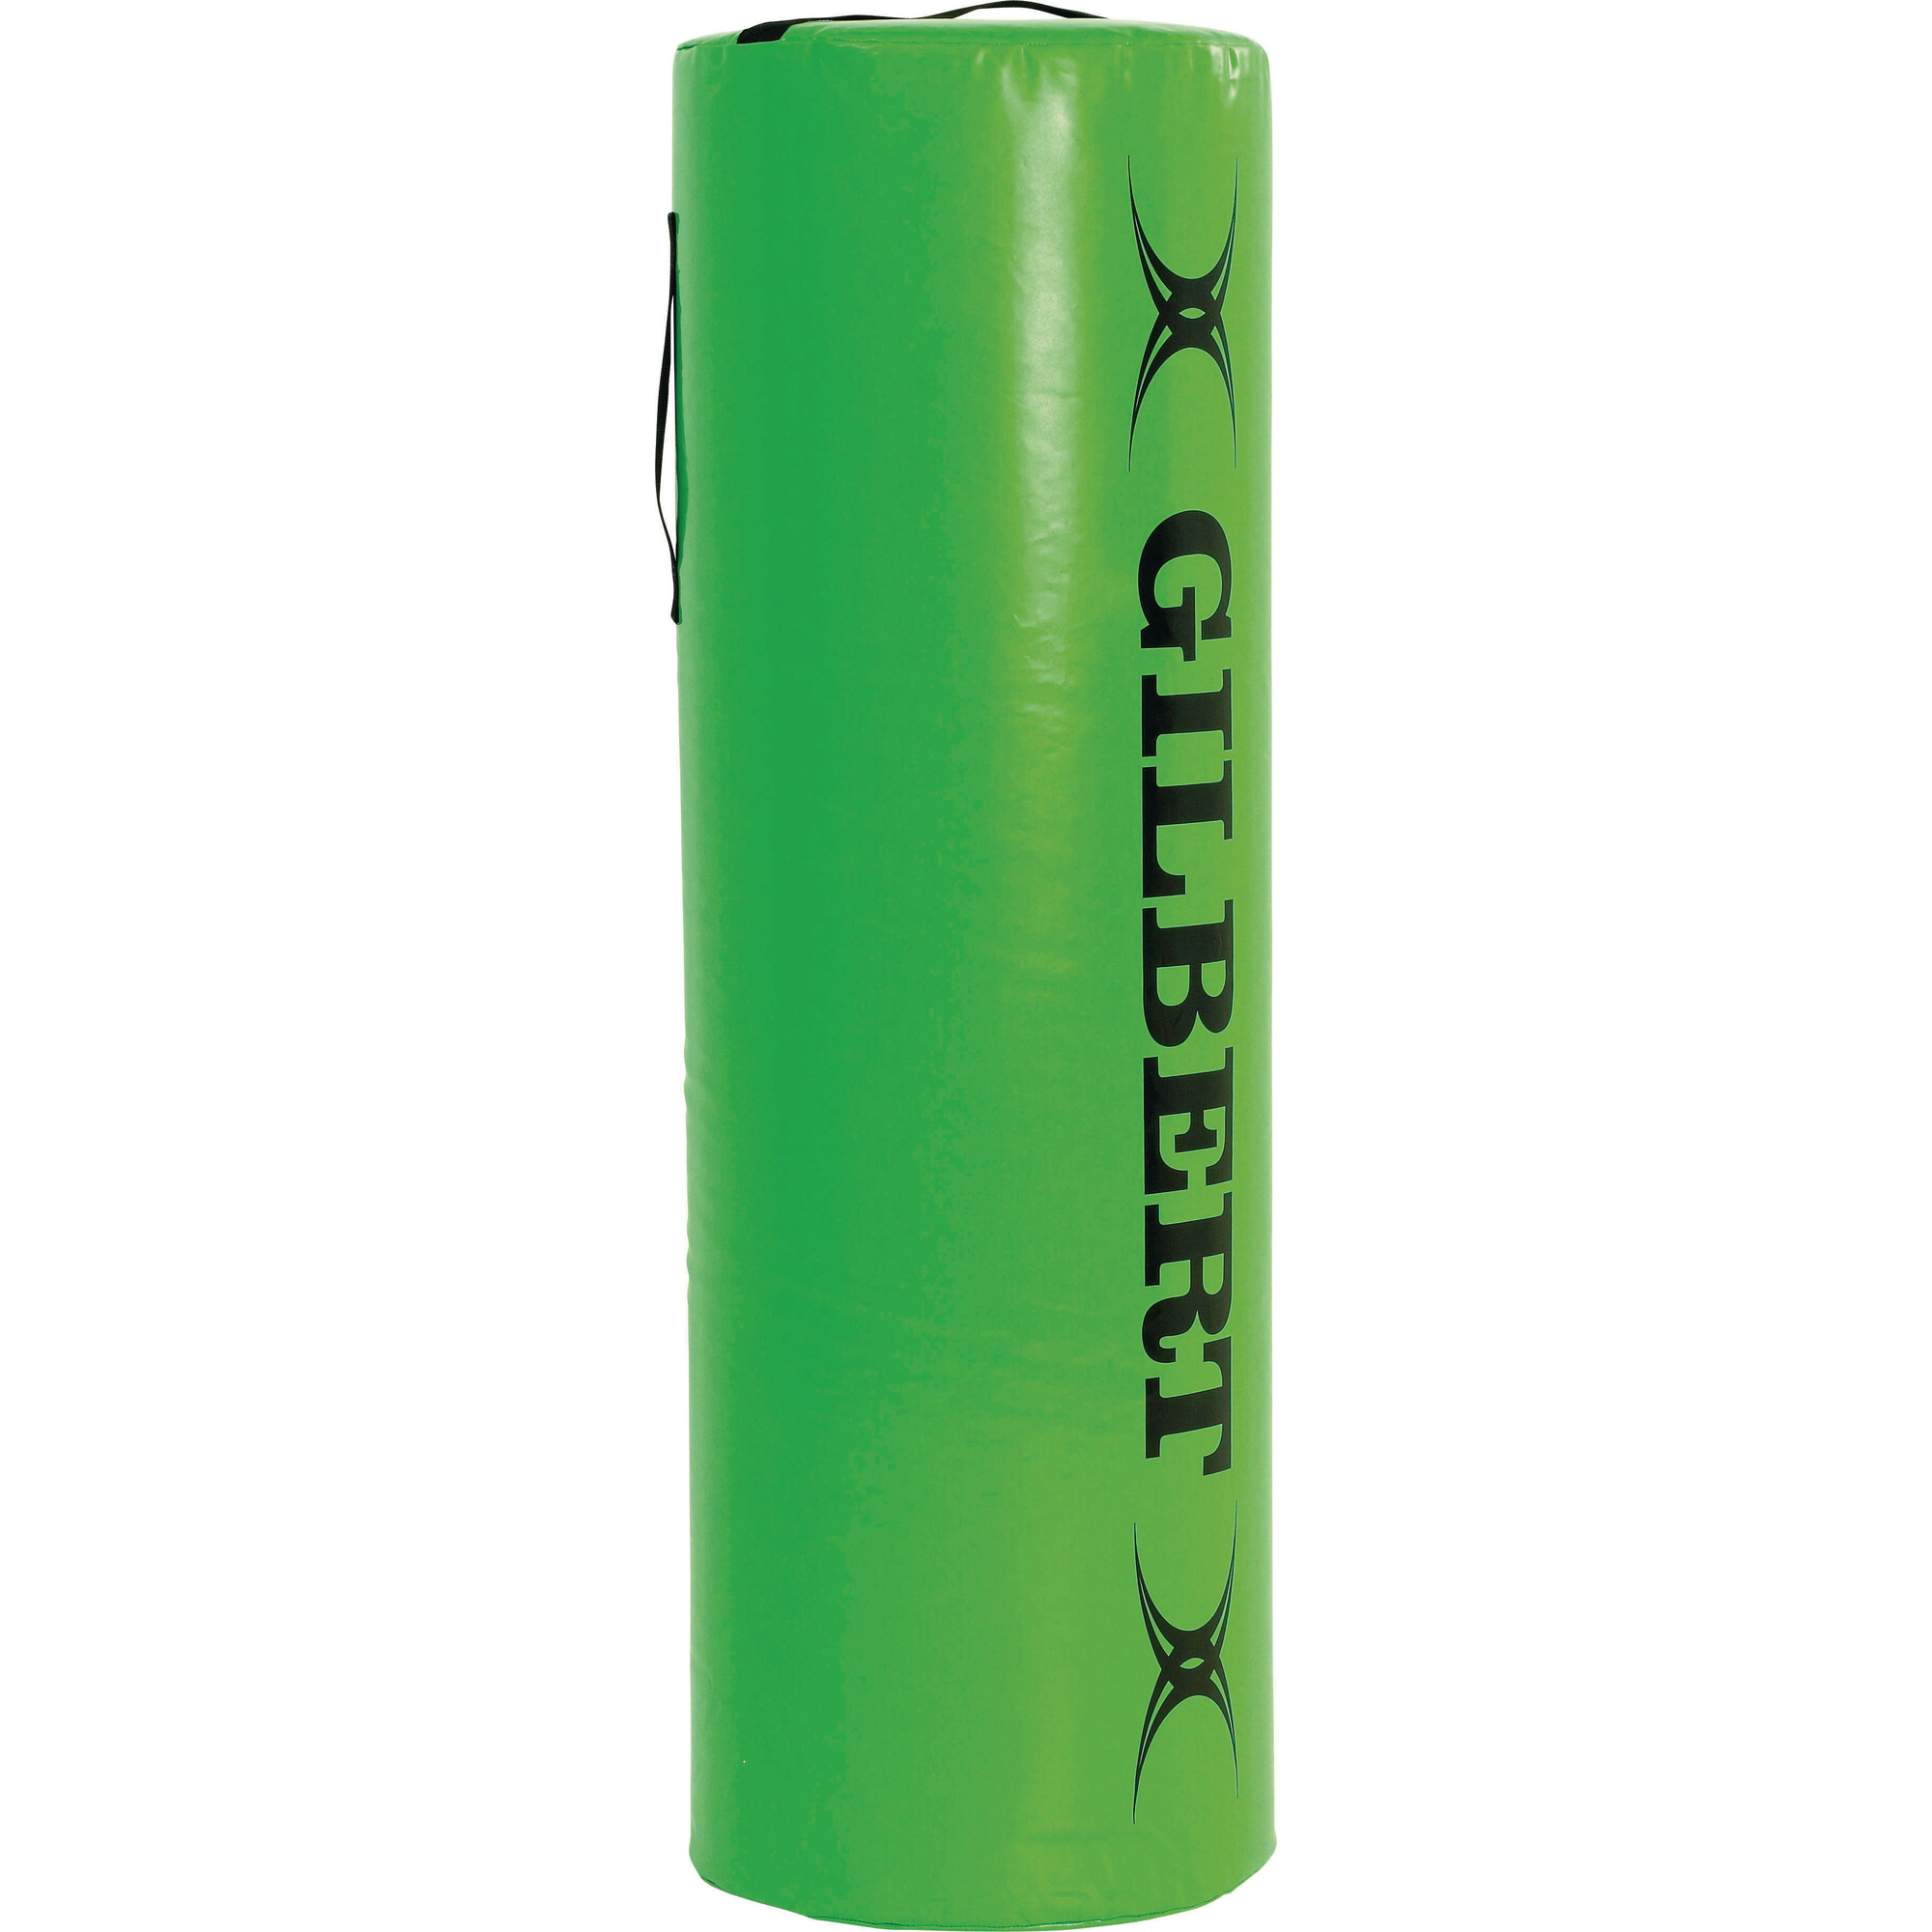 Green/Black Gilbert Rugby Technique Tackle Bag